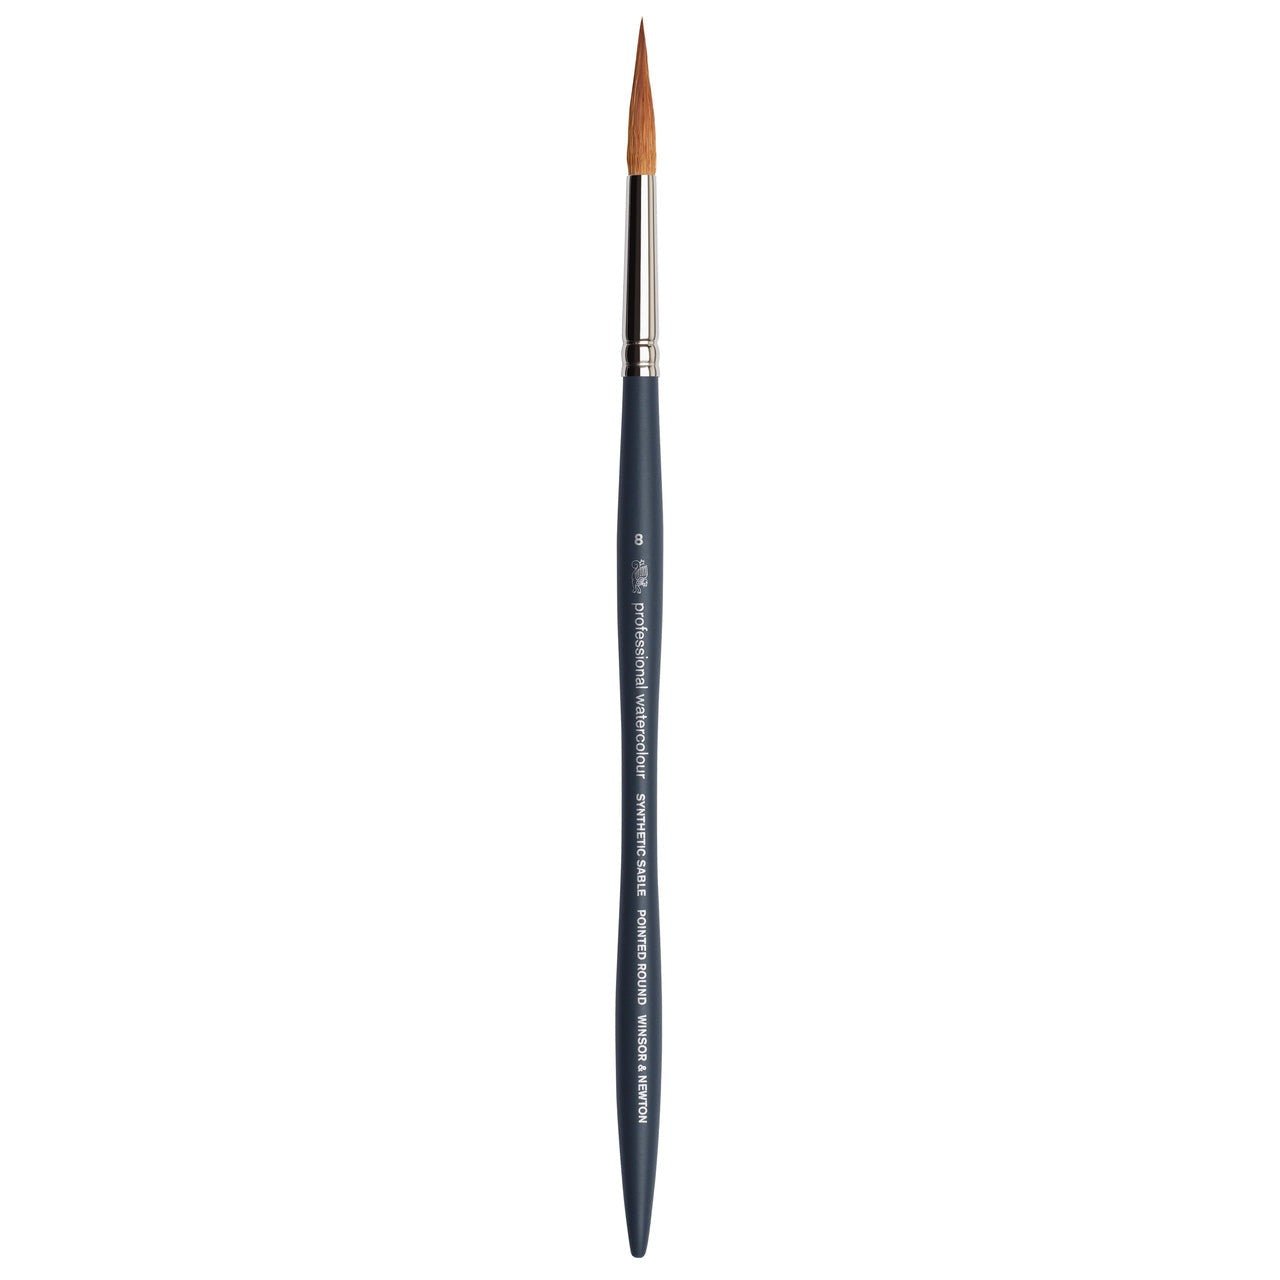 Winsor & Newton Professional Watercolor Synthetic Sable Brush - Pointed Round 8 - merriartist.com